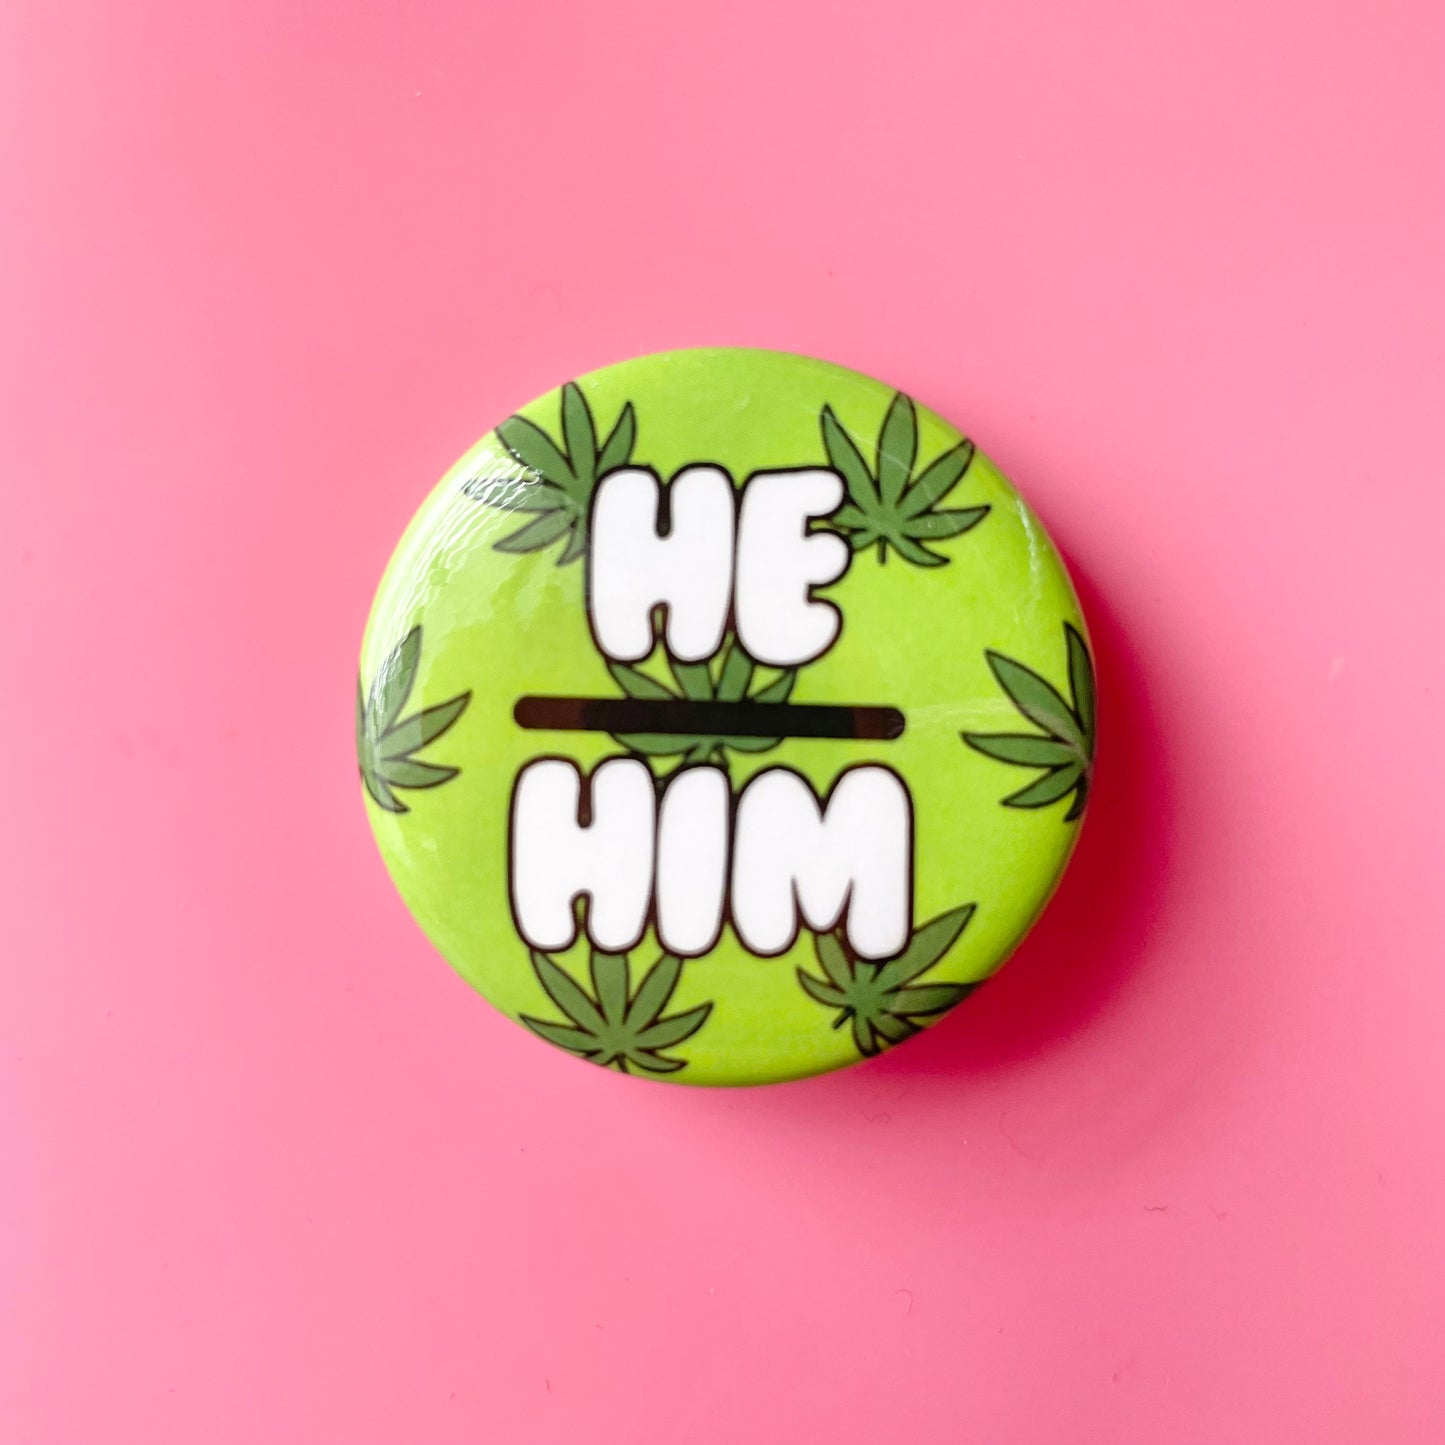 He/Him Button 1.5"